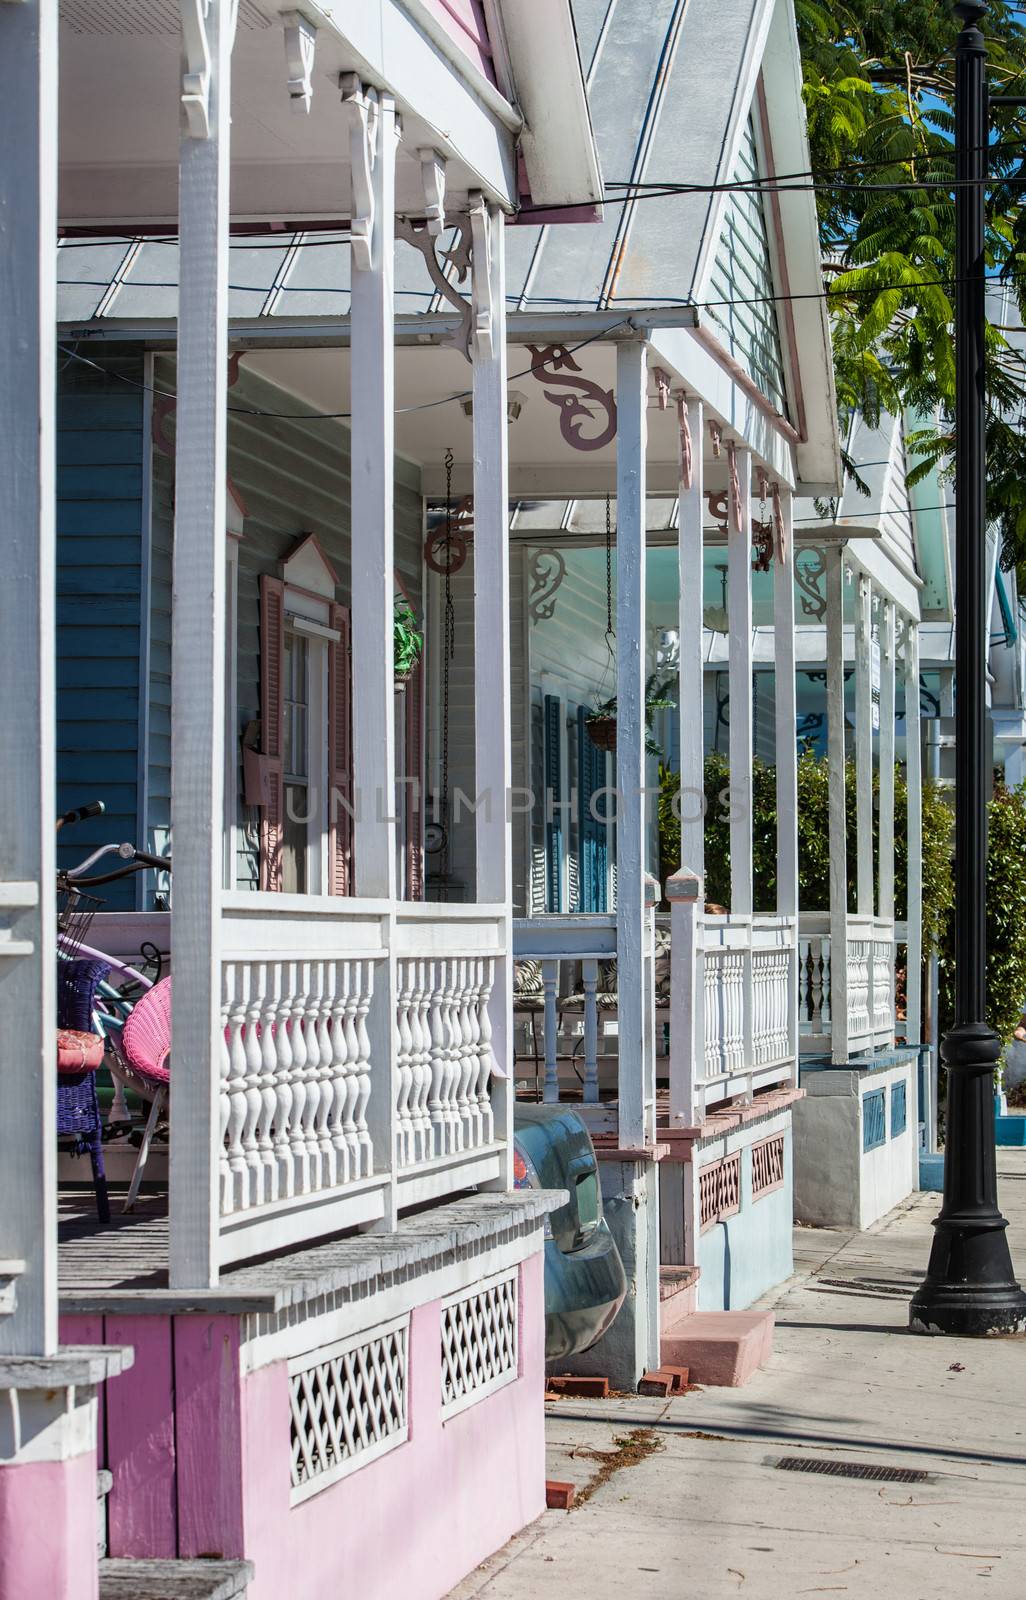 Detail of colorful homes in Key West, Florida